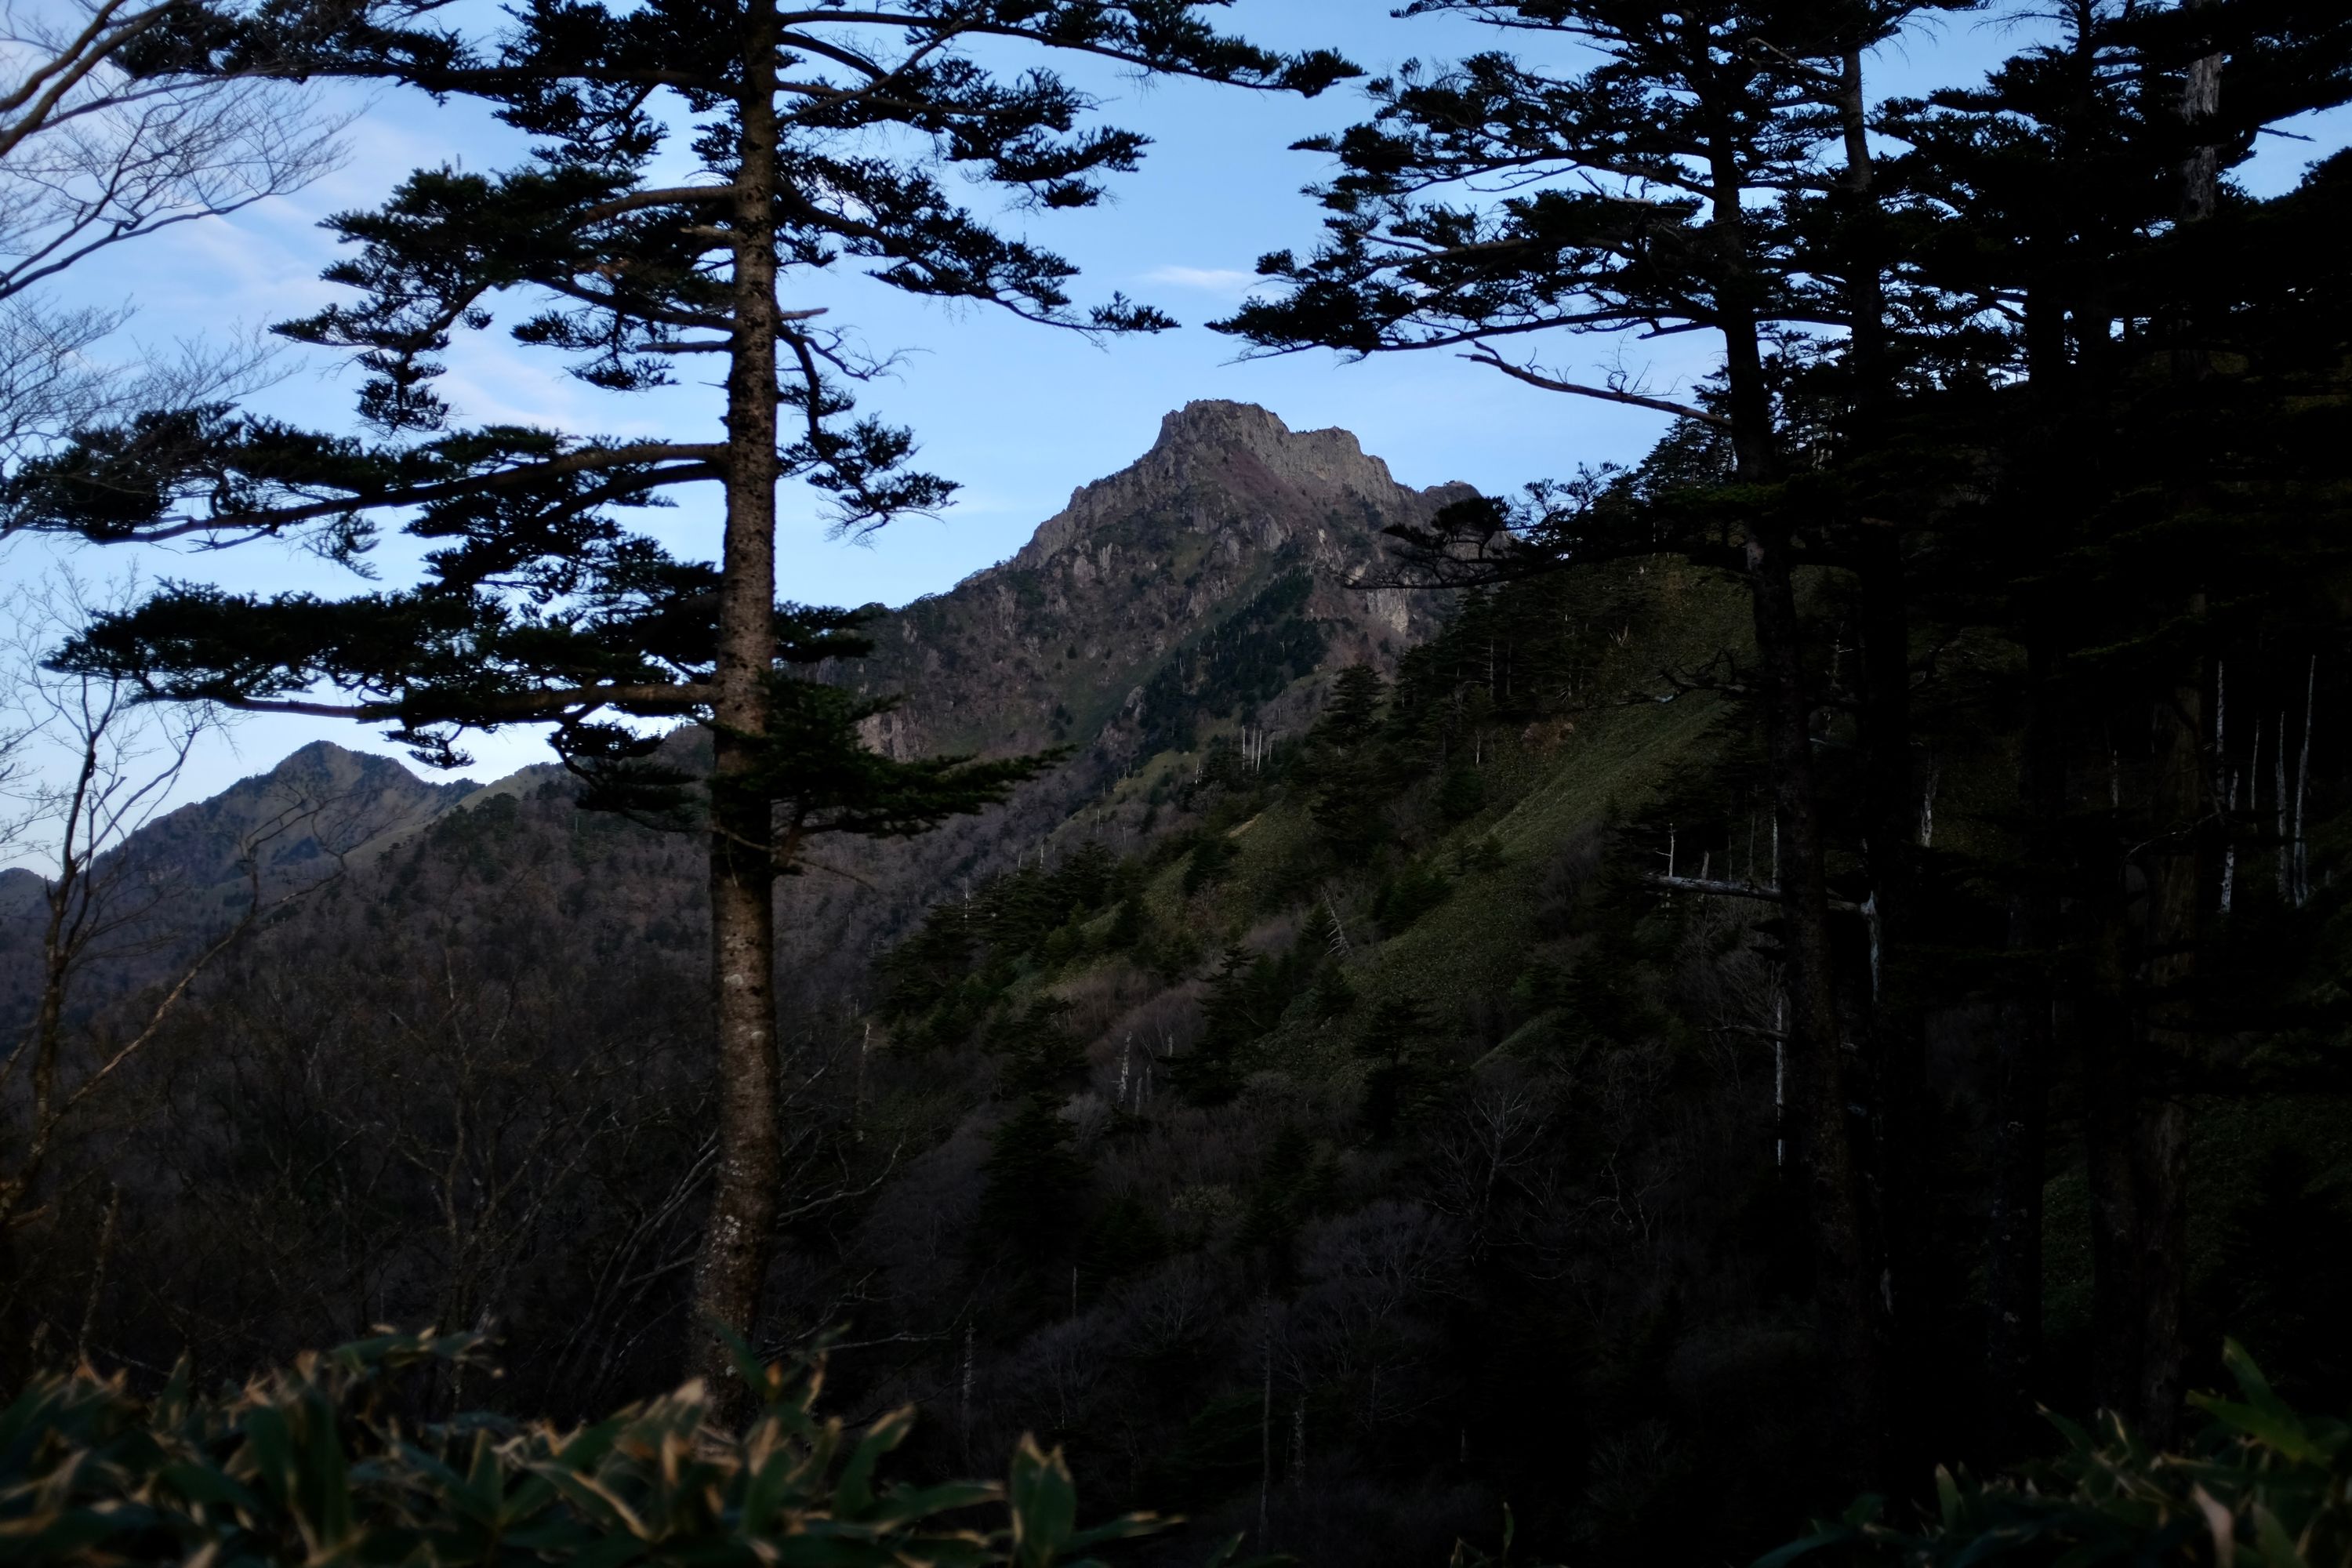 Pine trees with the summit of Mount Ishizuchi in the distance.